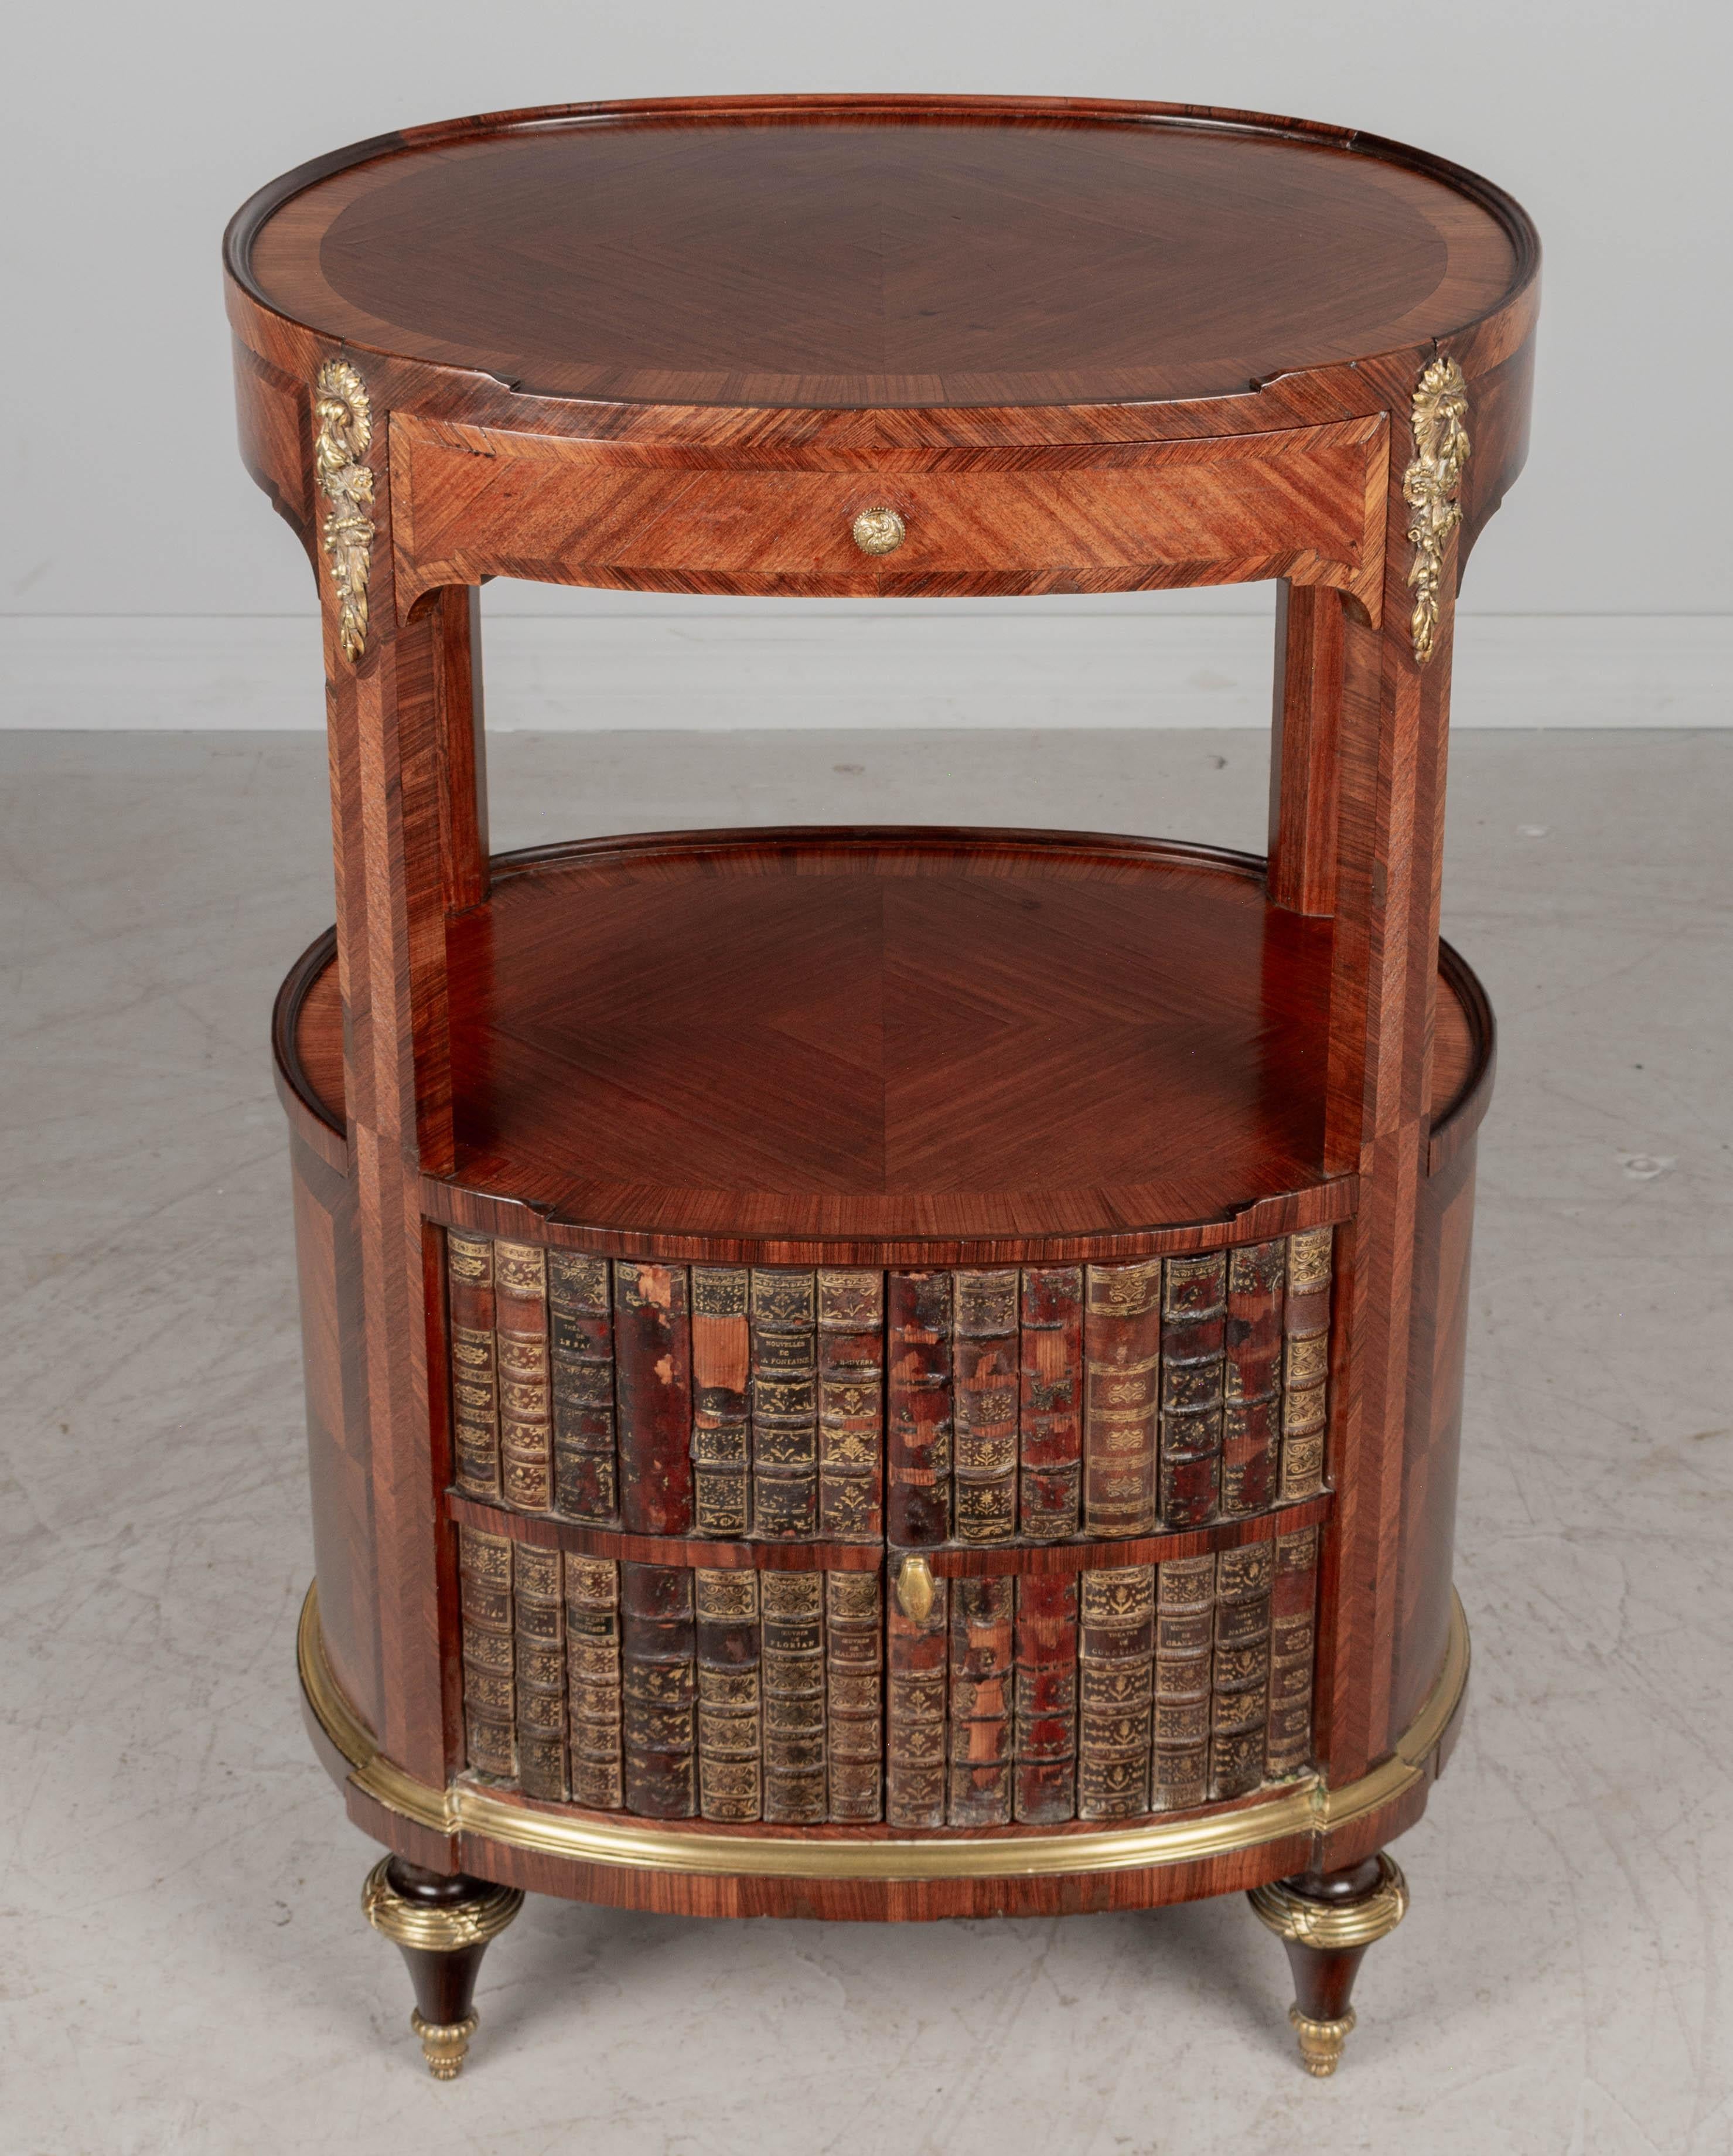 Moulage Early 20th c French Louis XVI Style Faux Book Side Table en vente